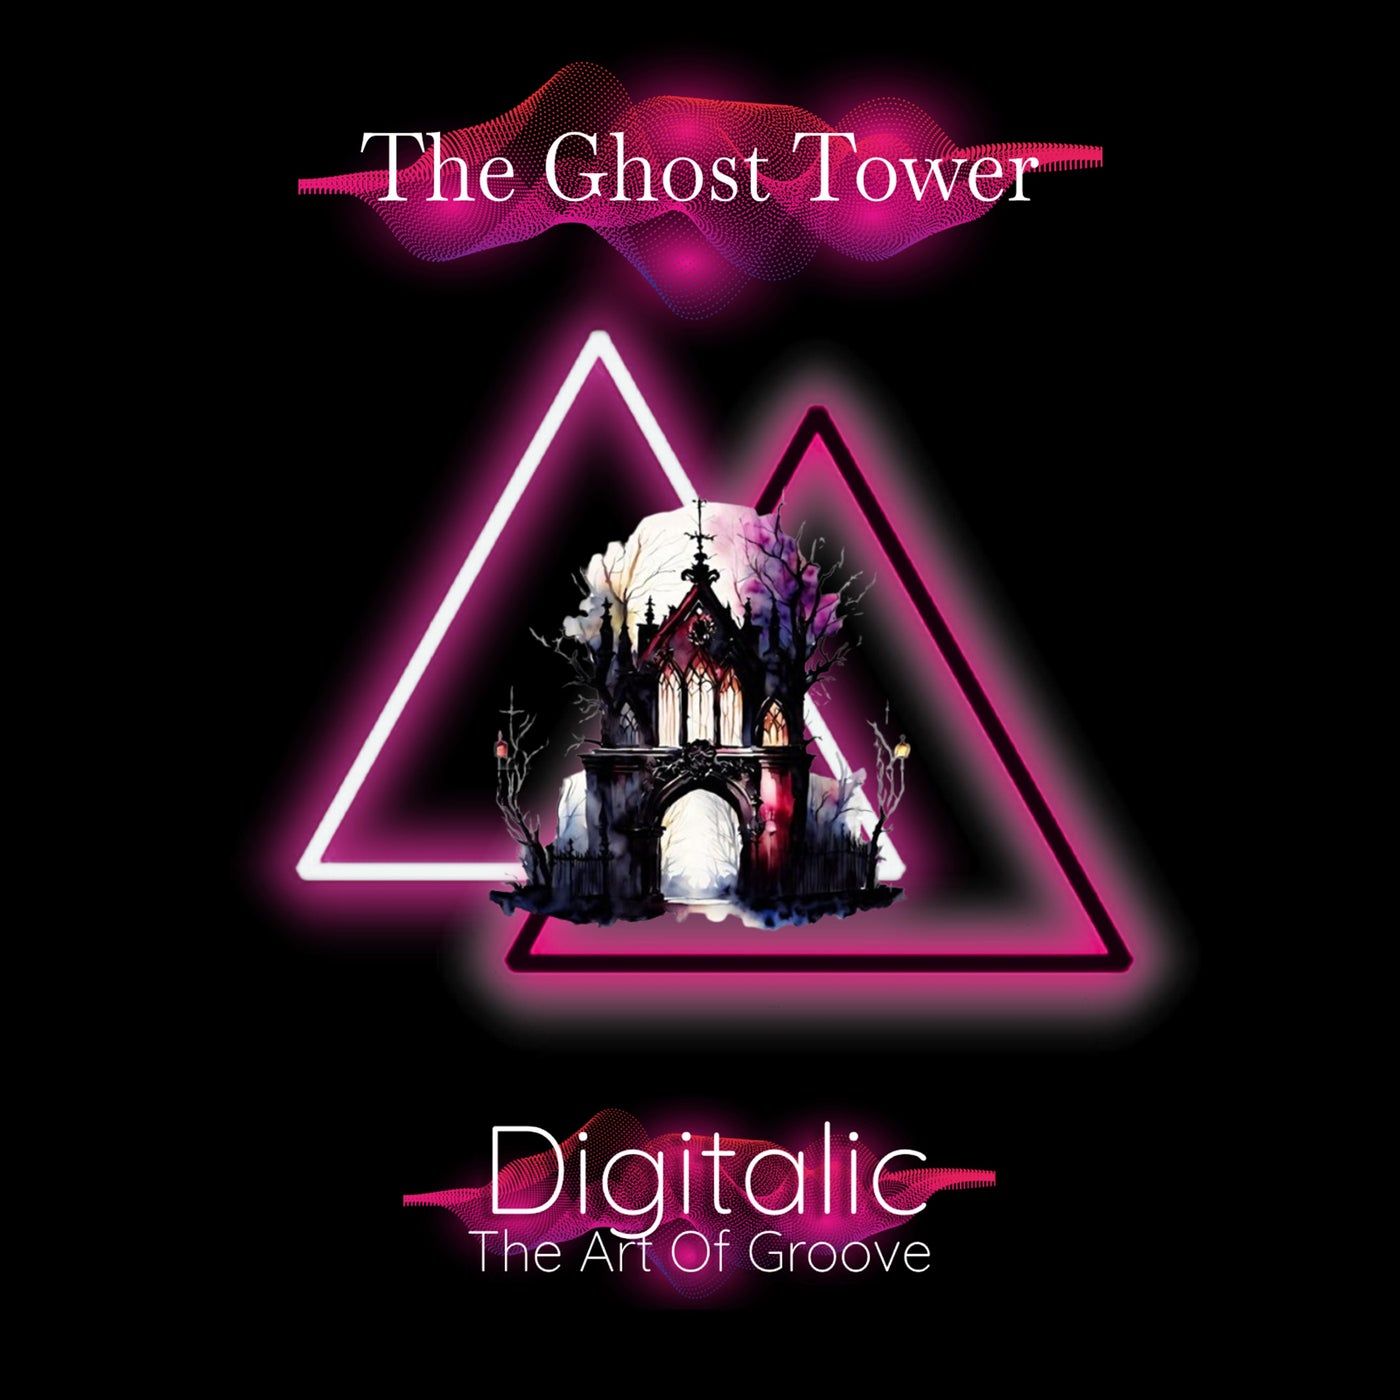 The Ghost Tower (Original Mix)